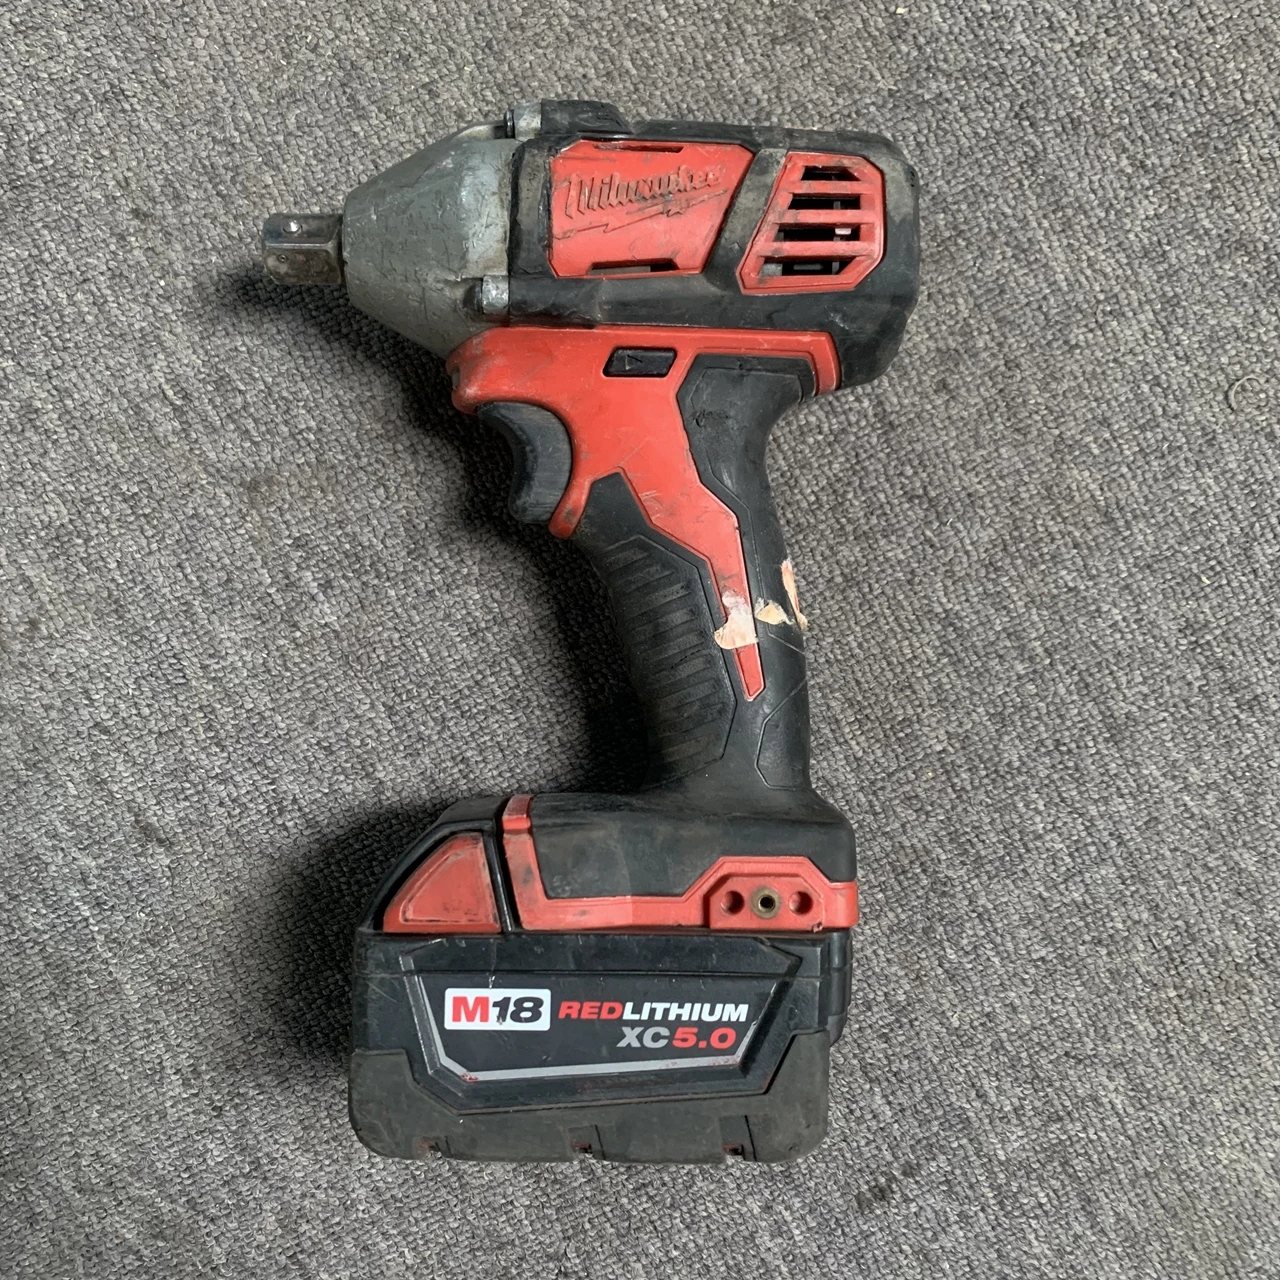 Milwaukee 2659-20 M18 18V 1/2-Inch Impact Wrench Includes 5.0AH battery  , ,SECOND HAND wp includes